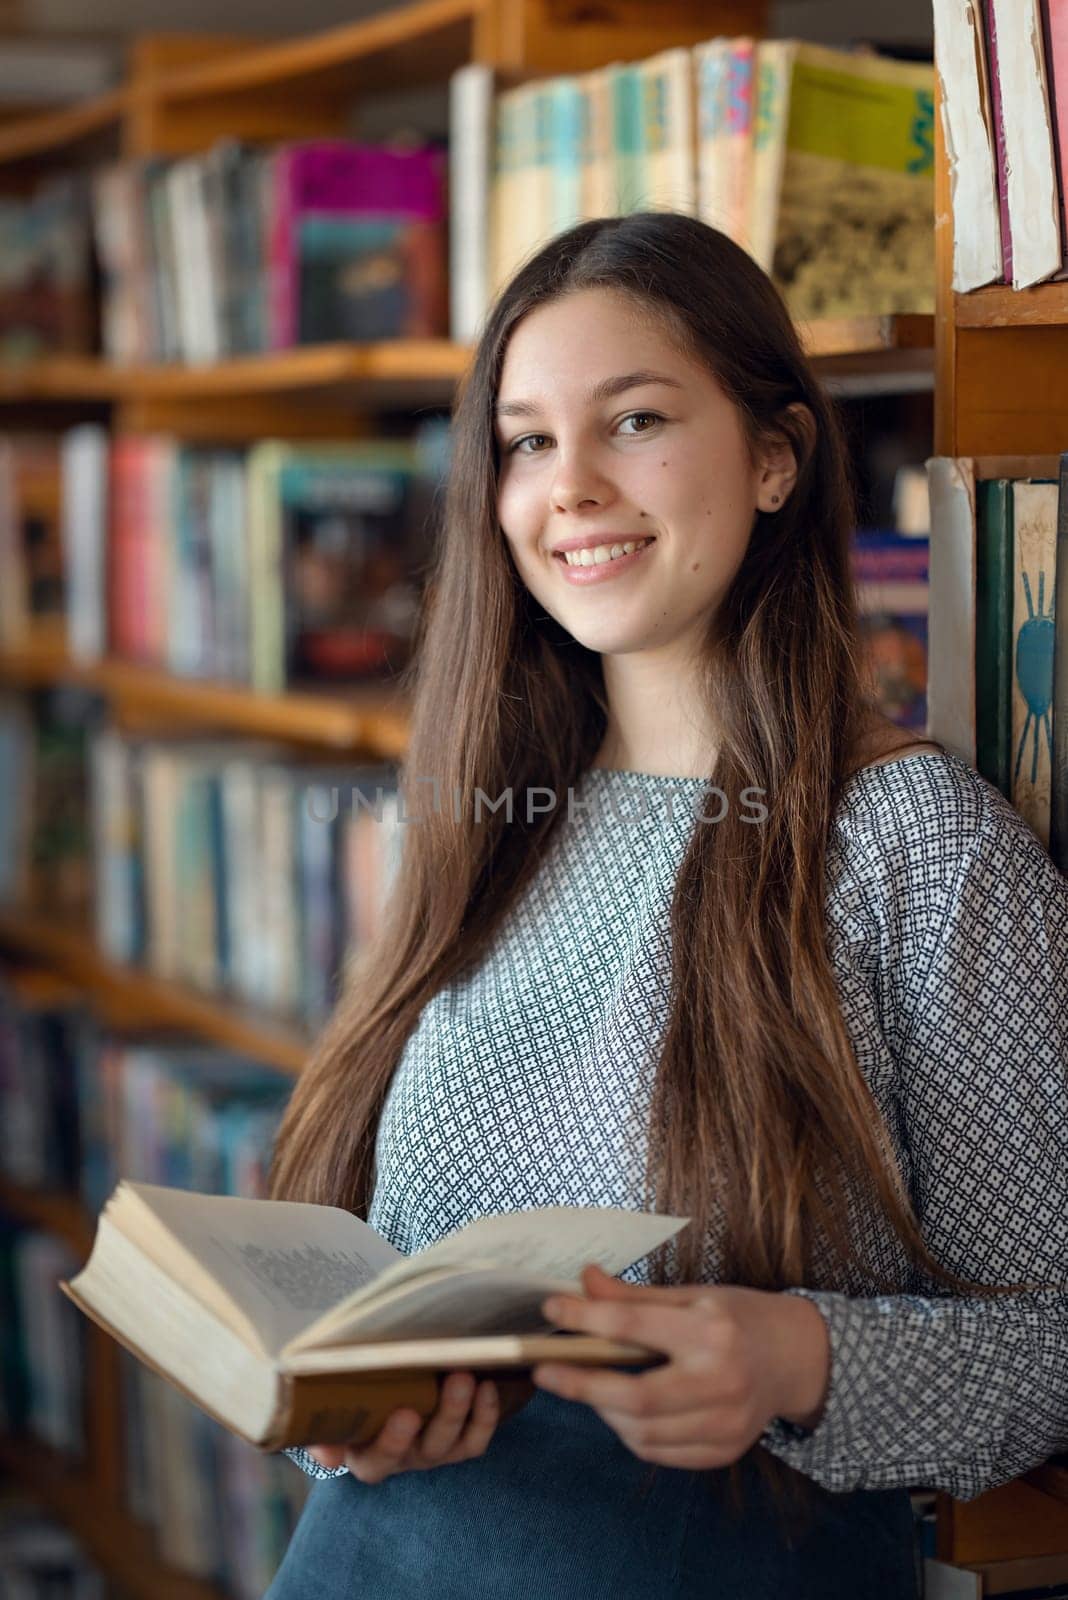 Student with an open book standing near shelves in library, choosing literature for reading